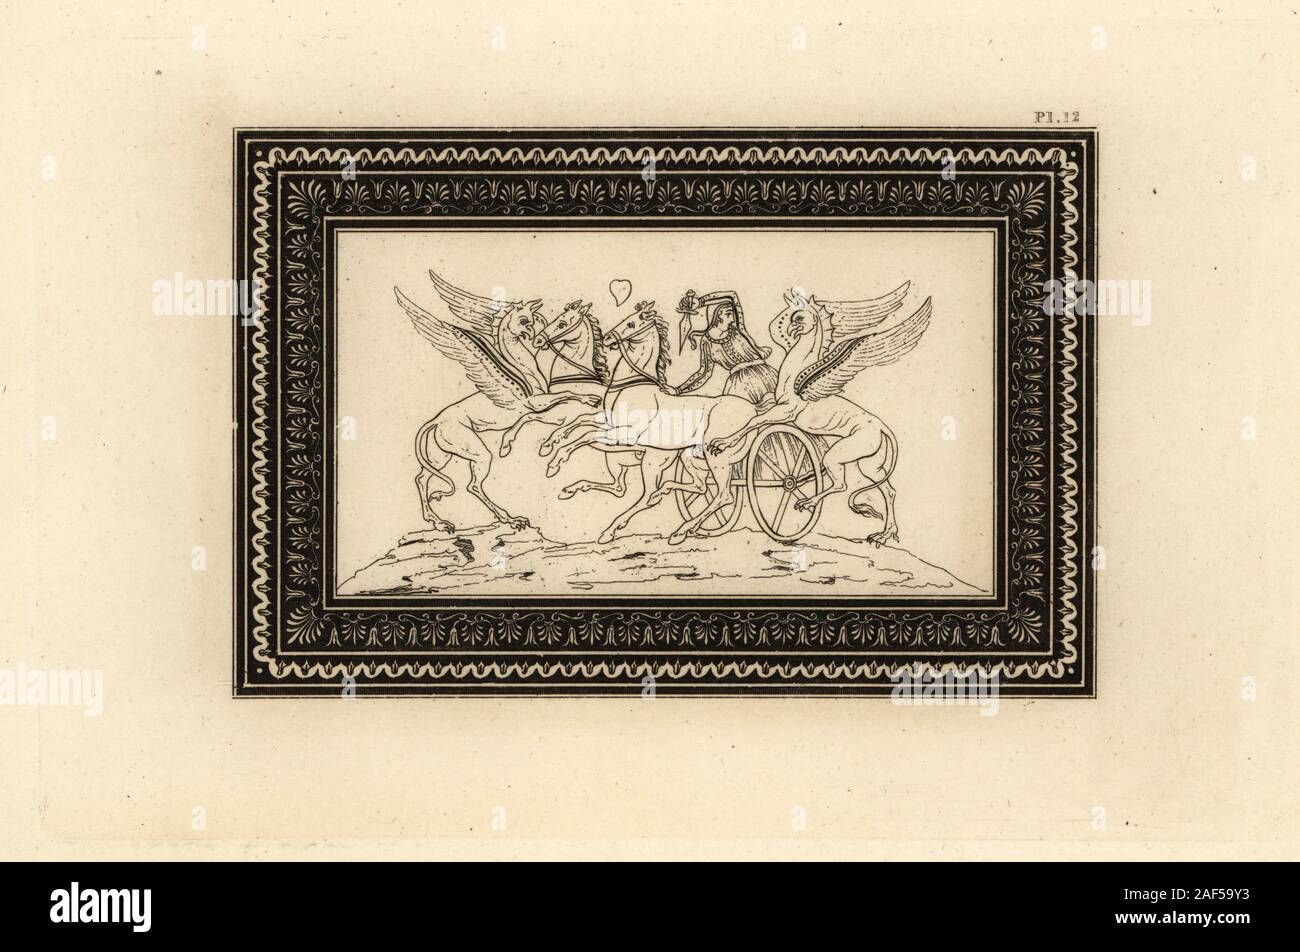 One-eyed Arimaspian in a biga or two-horse chariot attacked by winged griffons. Within a rectangular decorative border. Copperplate engraving by Thomas Kirk (1765-1797)  from Sir William Hamilton’s Outlines from the Figures and Compositions upon the Greek, Roman and Etruscan Vases of the Late Sir Hamilton, T. M’Lean, London, 1834. Stock Photo